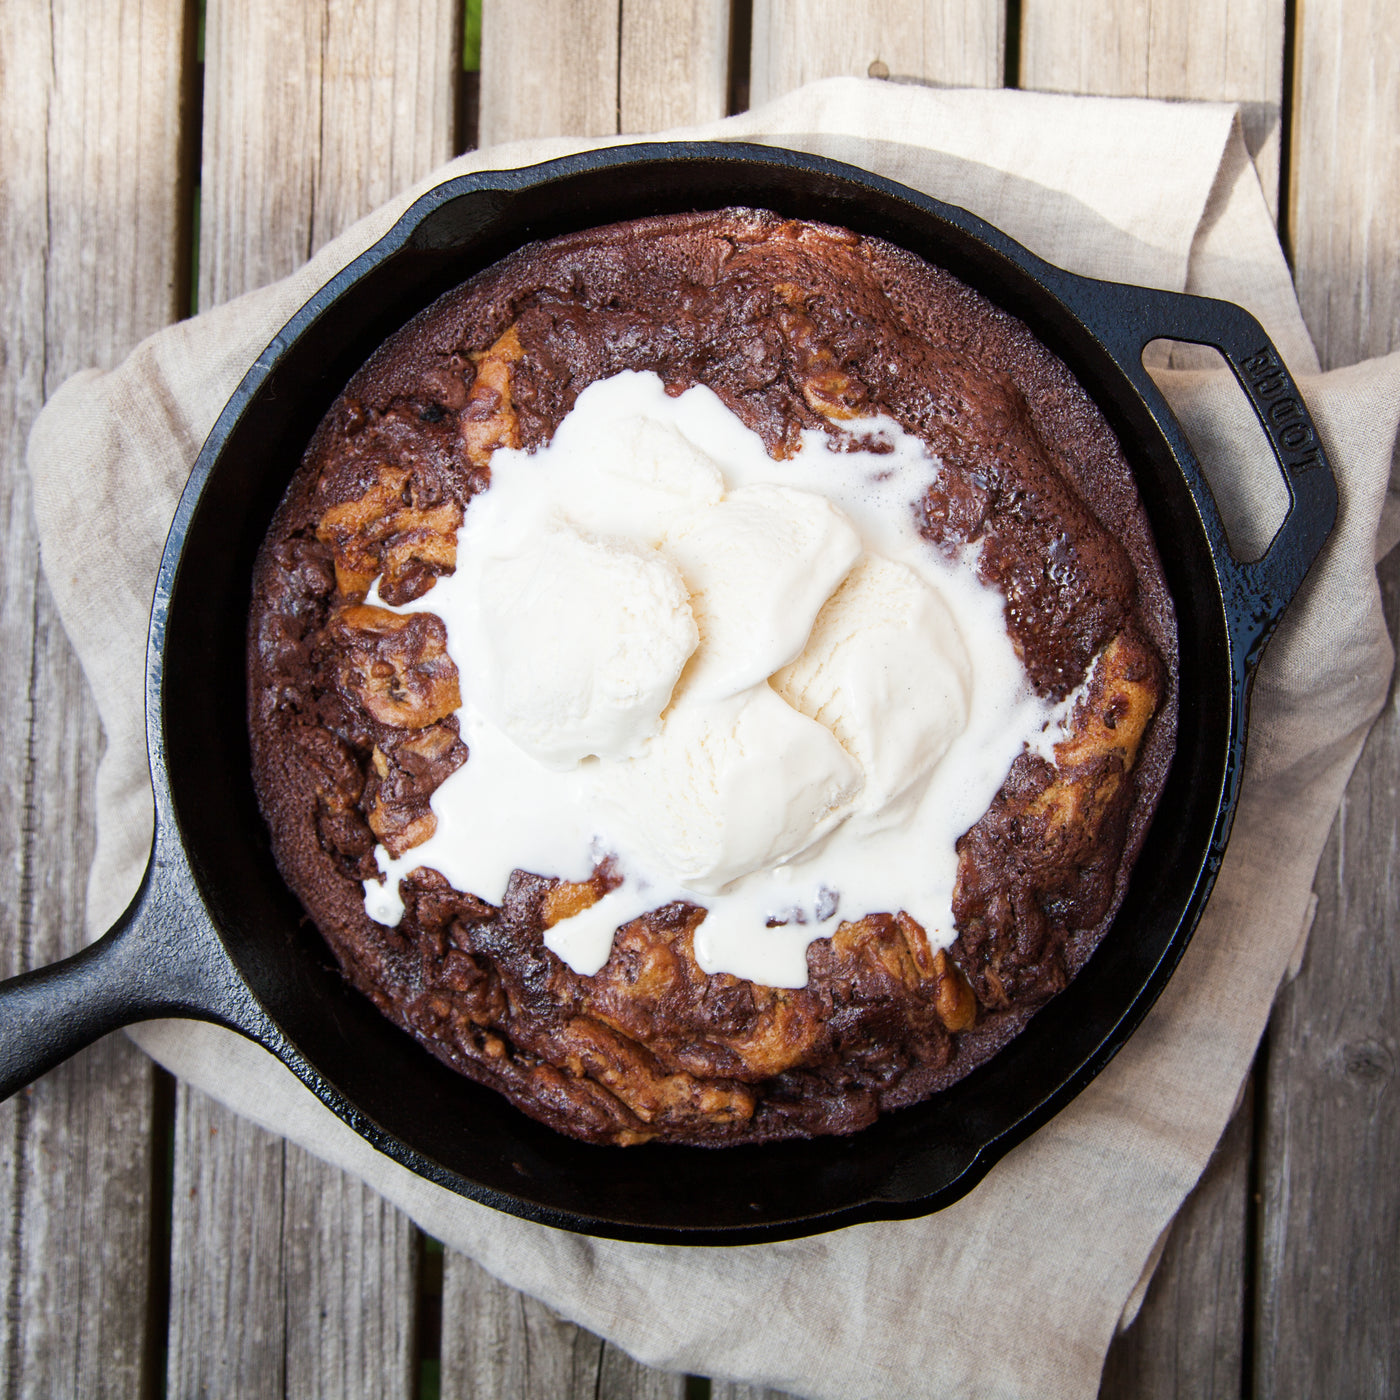 https://www.eatpre.com/blogs/recipes/brownie-cookie-skillet-with-vanilla-ice-cream?_pos=1&_sid=f73e753a2&_ss=r